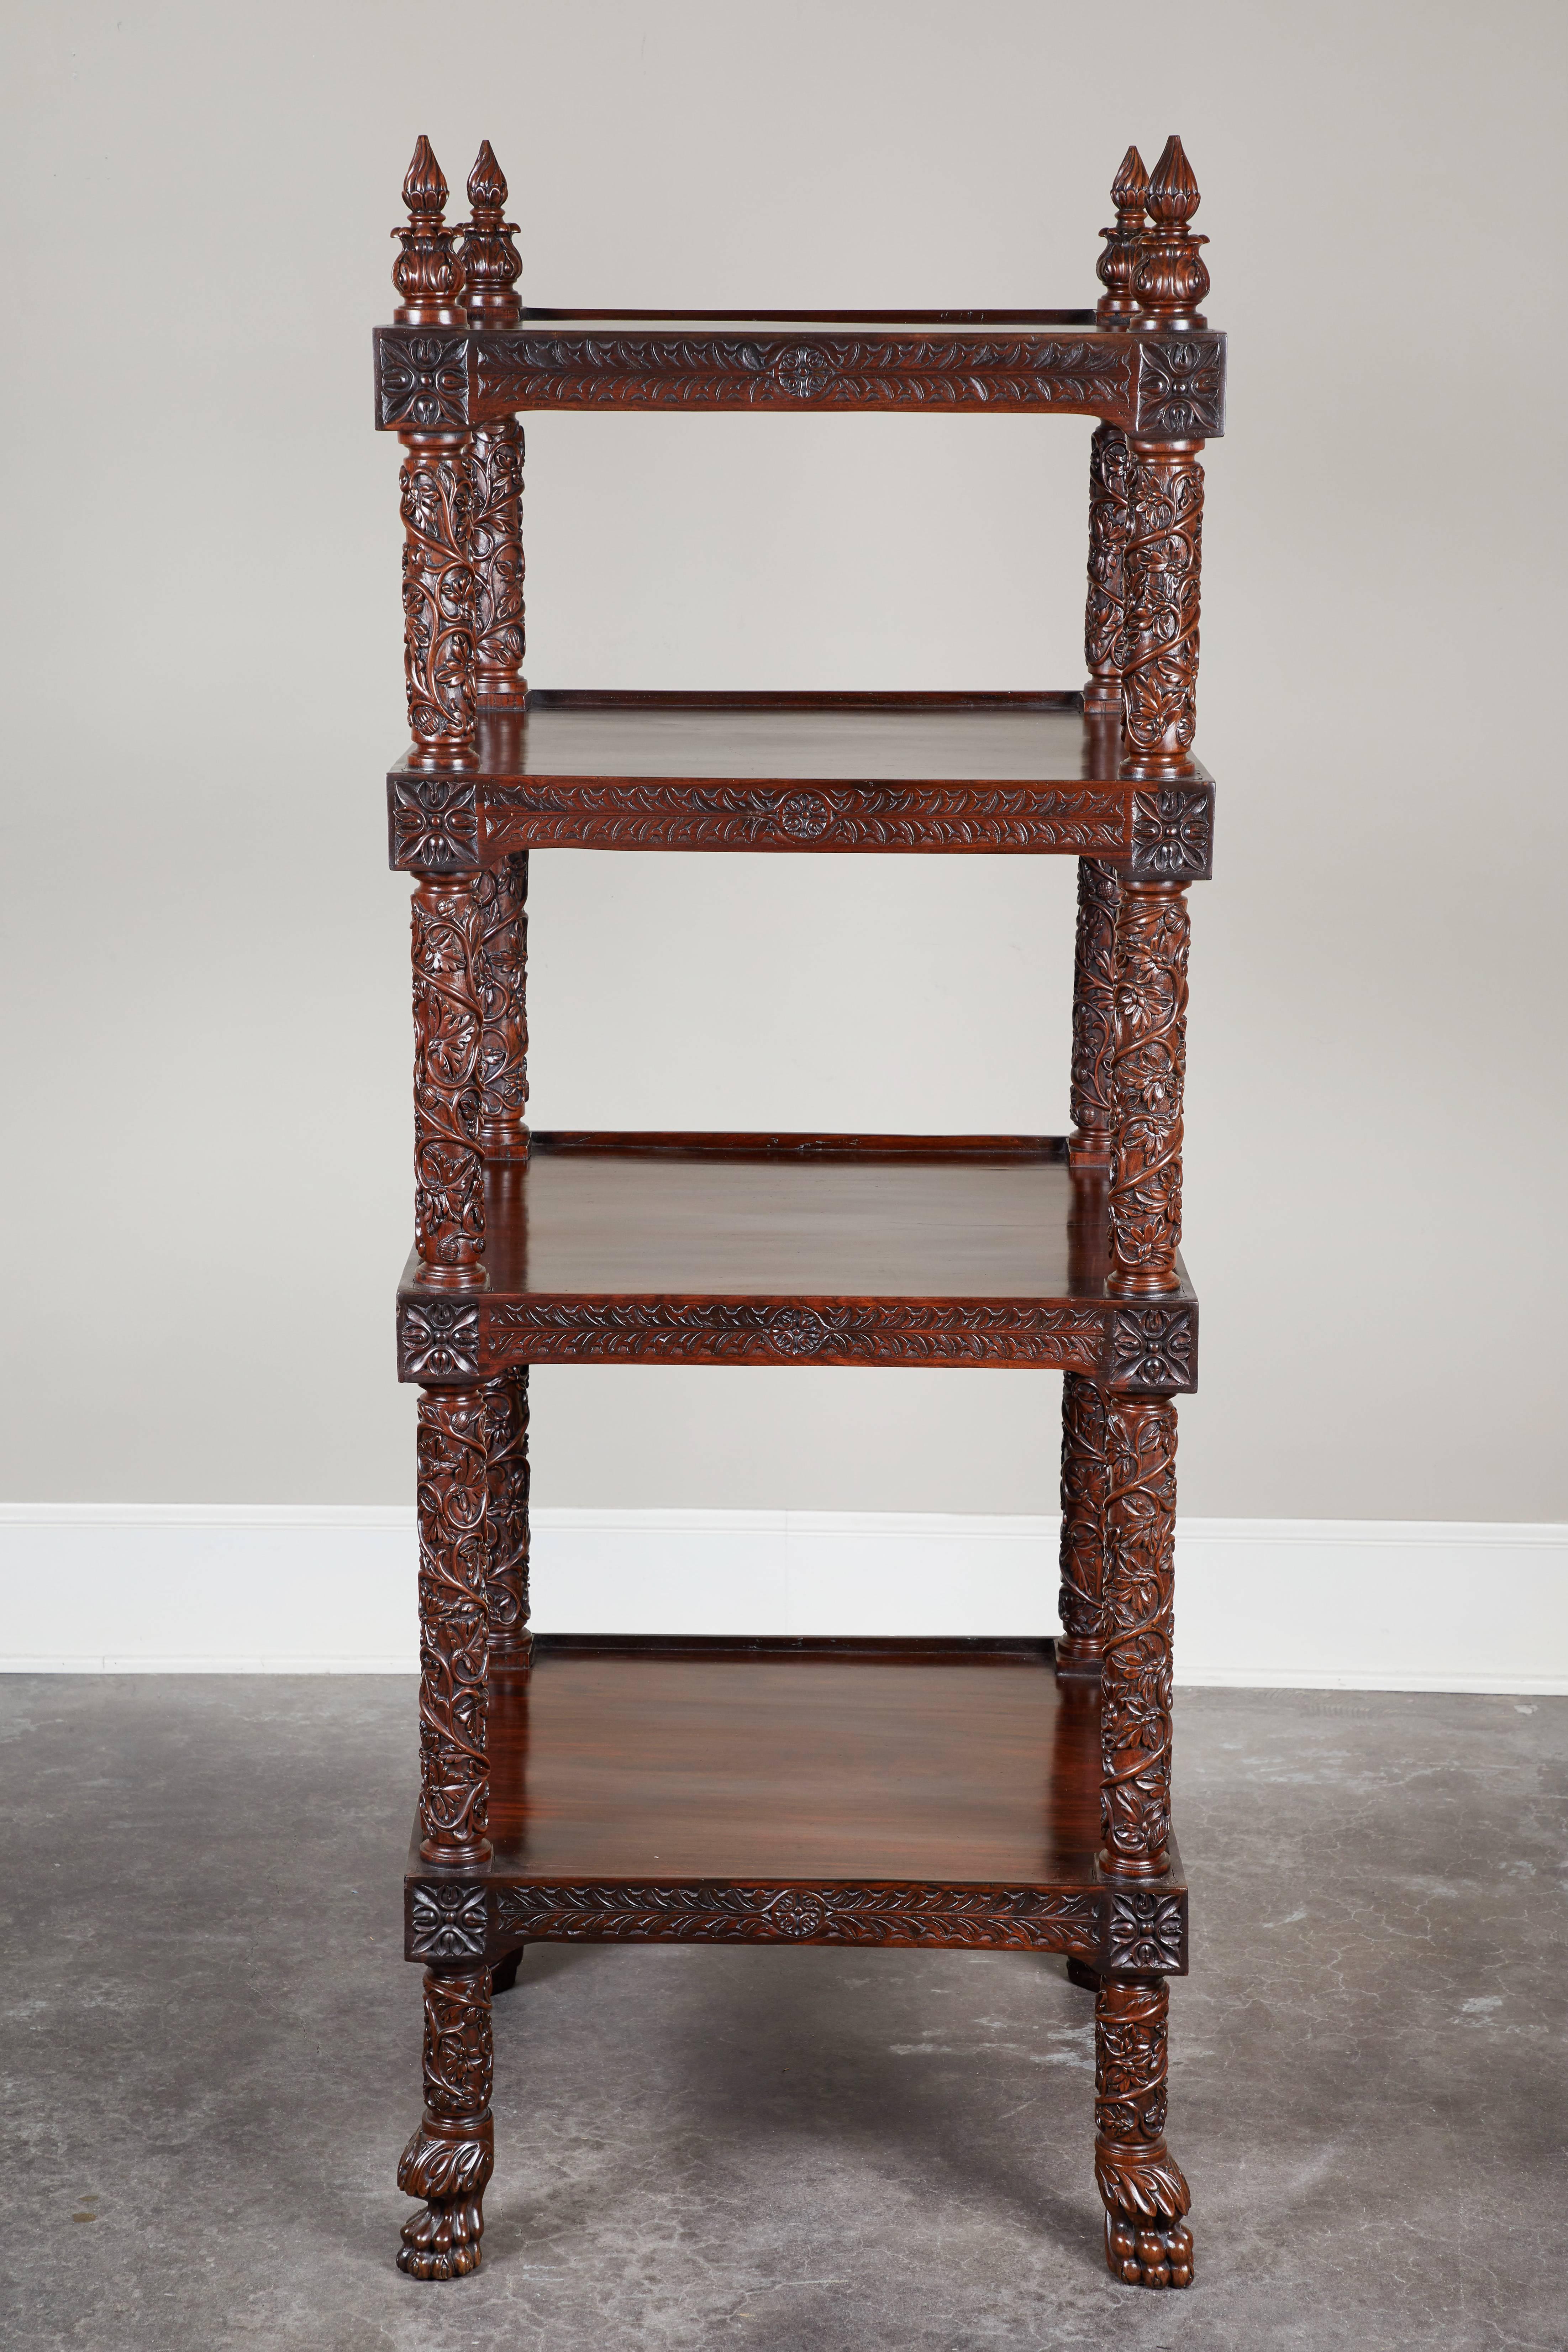 A 19th century four-tiered rosewood carved étagère. Intricately carved legs feature a flora and fauna motif.